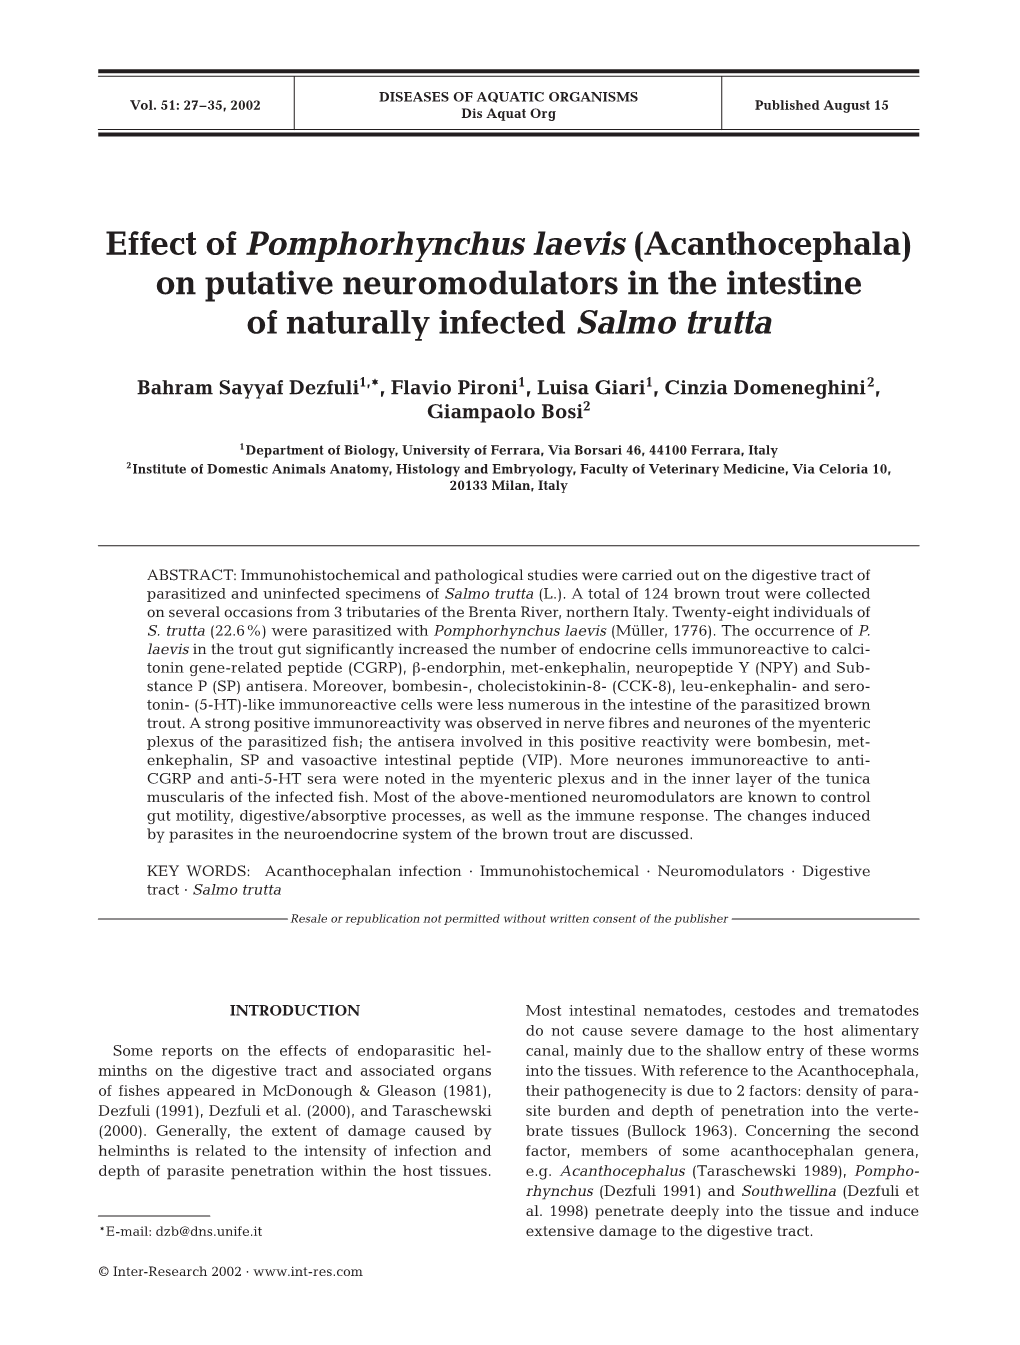 Effect of Pomphorhynchus Laevis (Acanthocephala) on Putative Neuromodulators in the Intestine of Naturally Infected Salmo Trutta